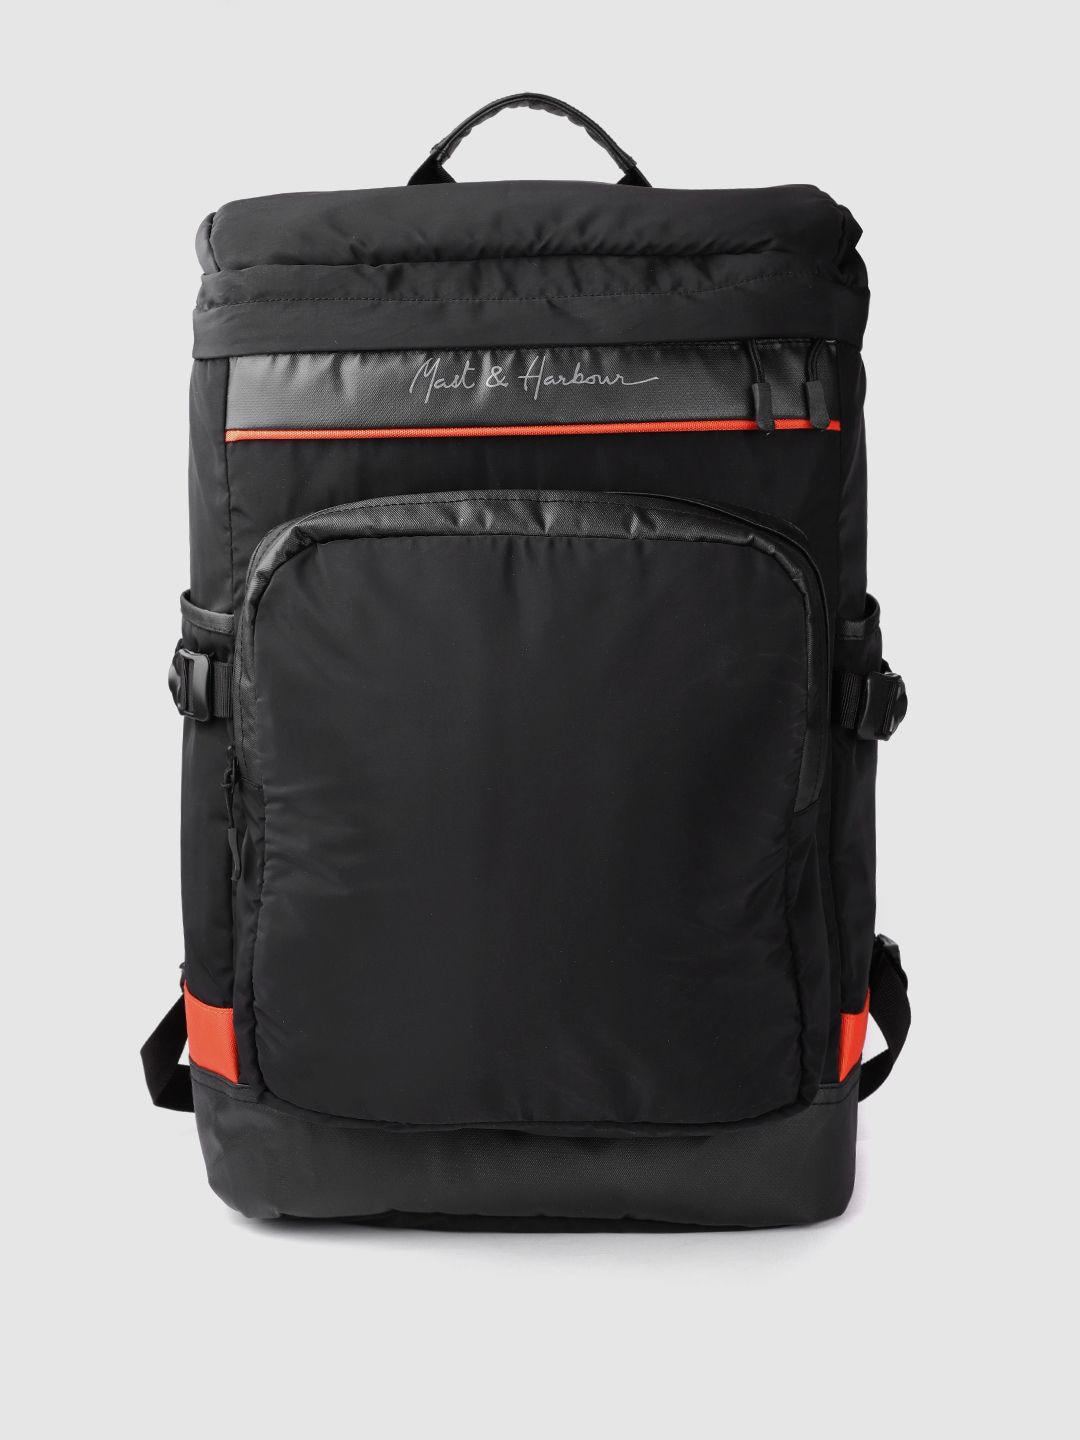 Mast & Harbour Unisex Black Solid Backpack 20.8 L Price in India